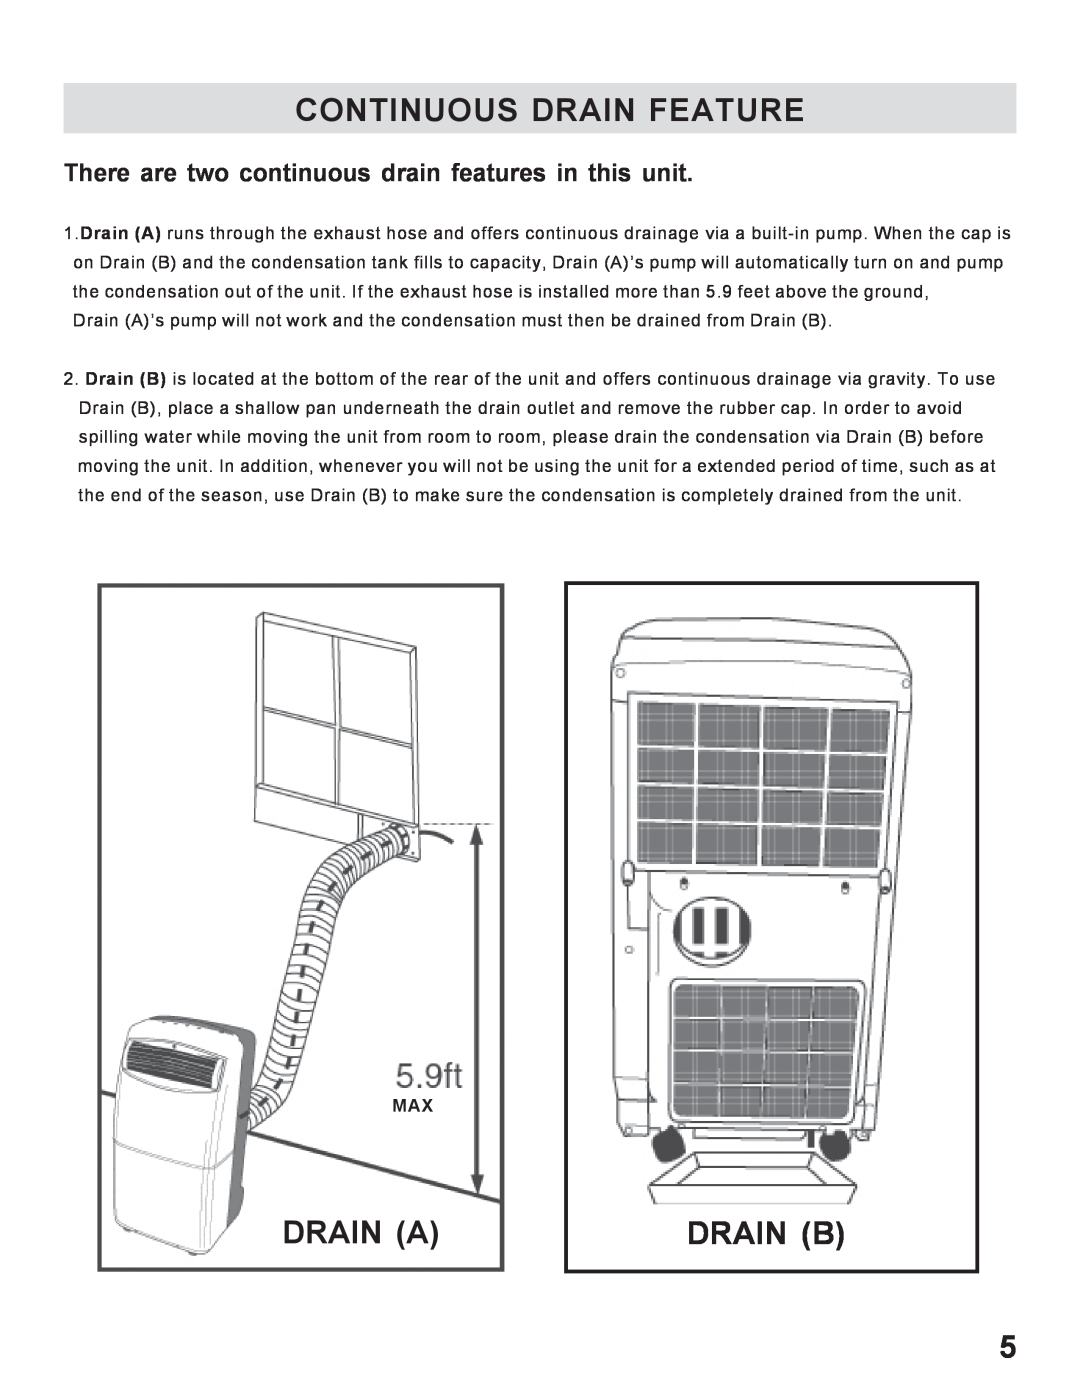 WindChaser Products PACR12 instruction manual Continuous Drain Feature, Drain A, Drain B 